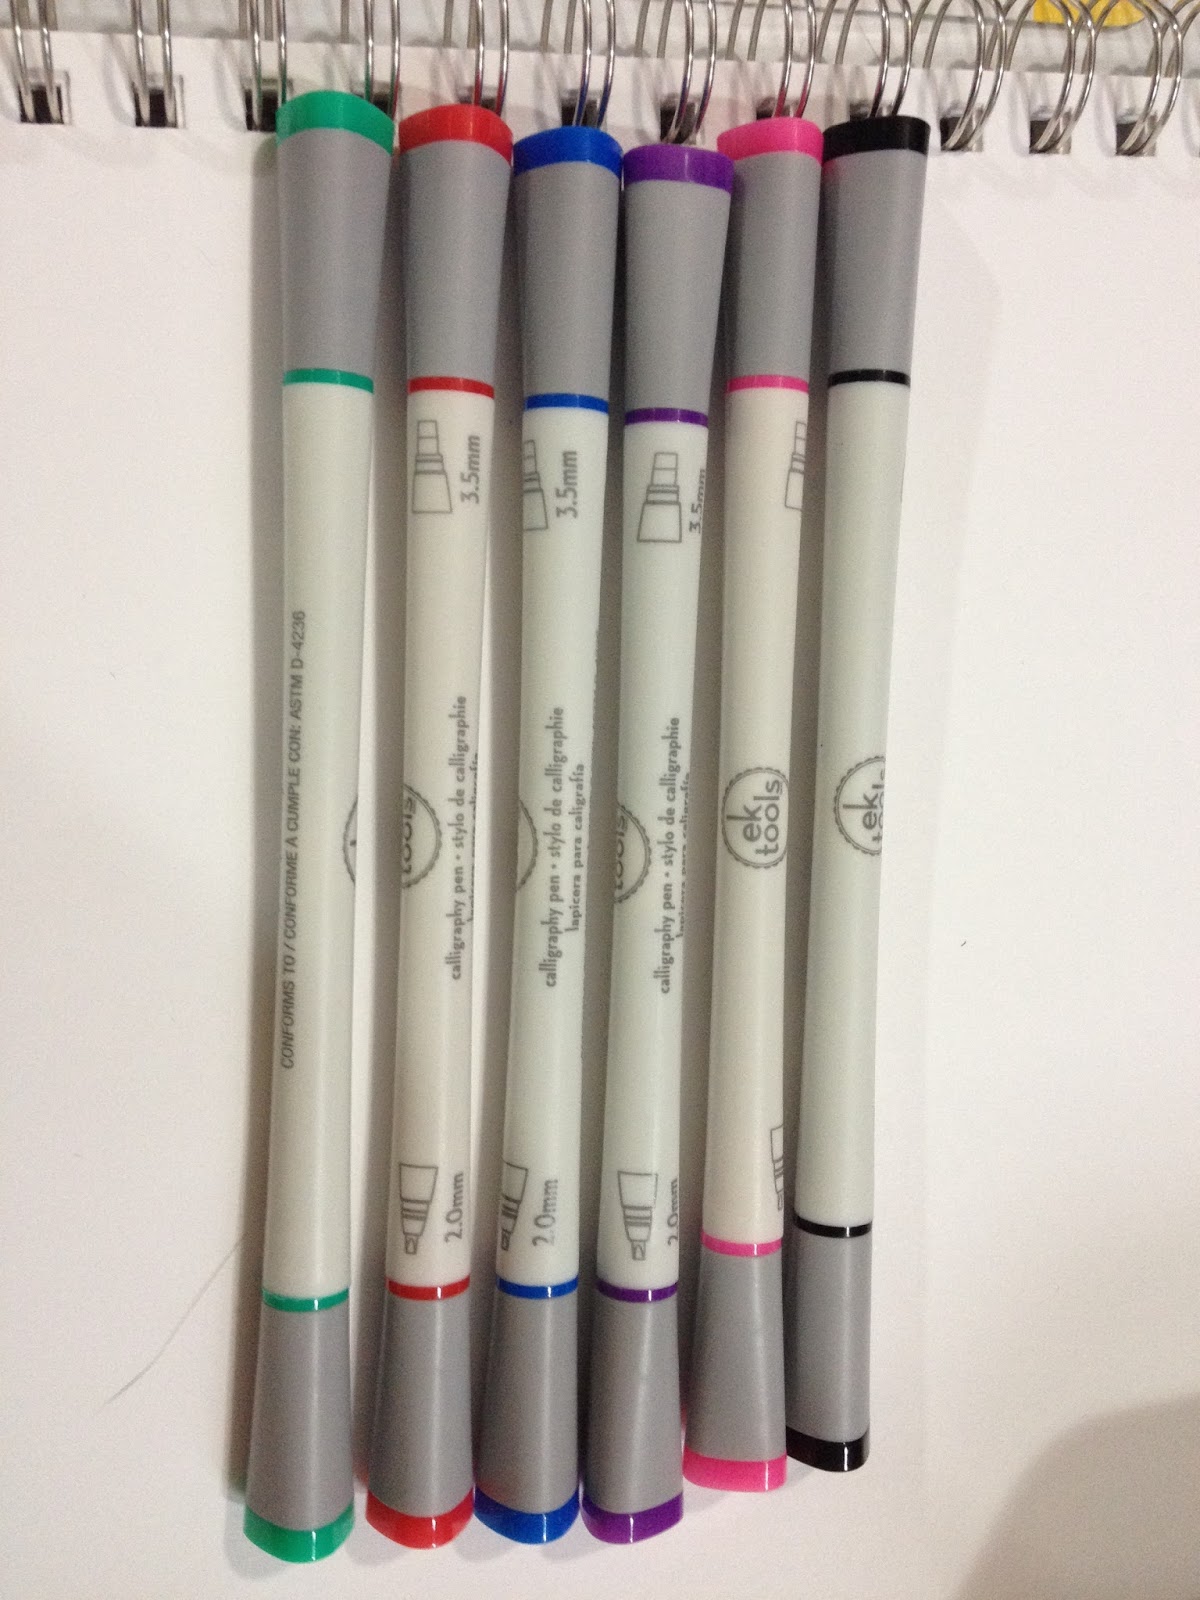 6 Writing, Calligraphy Sharpie Fine Point Tip Pen, Stylo, 6 Colored Pens  Drawing, Coloring Pens, Sharpie Arts Crafts 